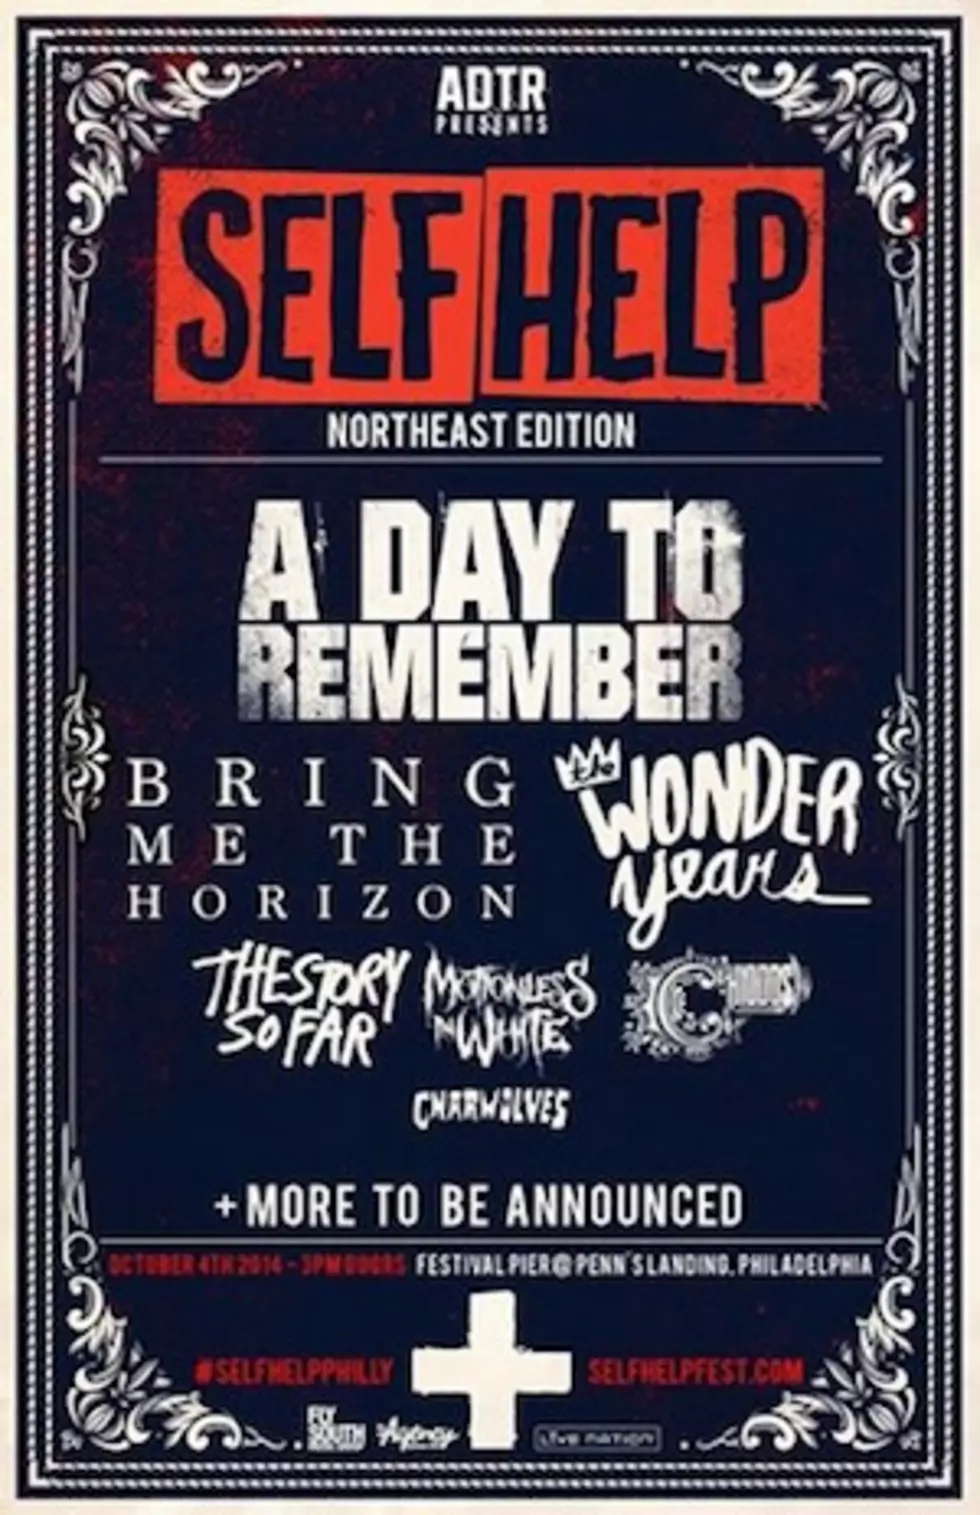 A Day to Remember Announce Second 'Self Help' Festival